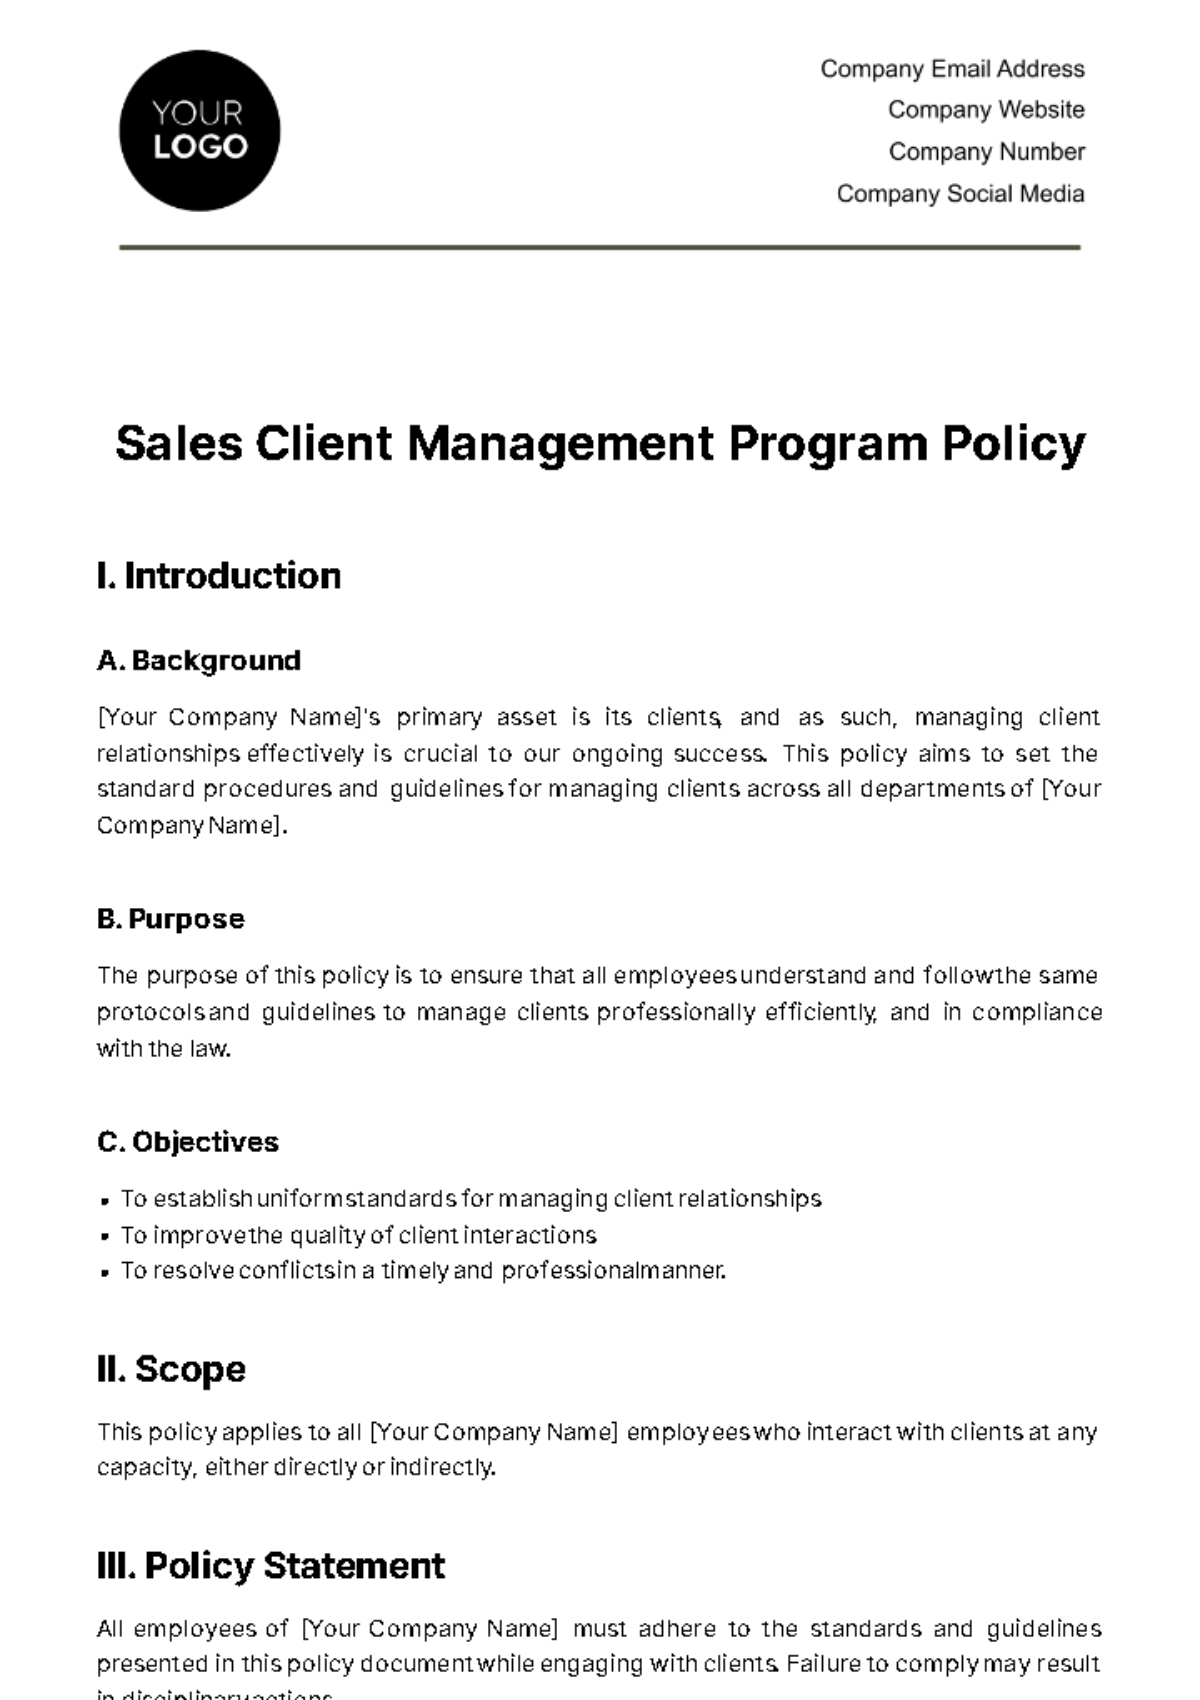 Free Sales Client Management Program Policy Template